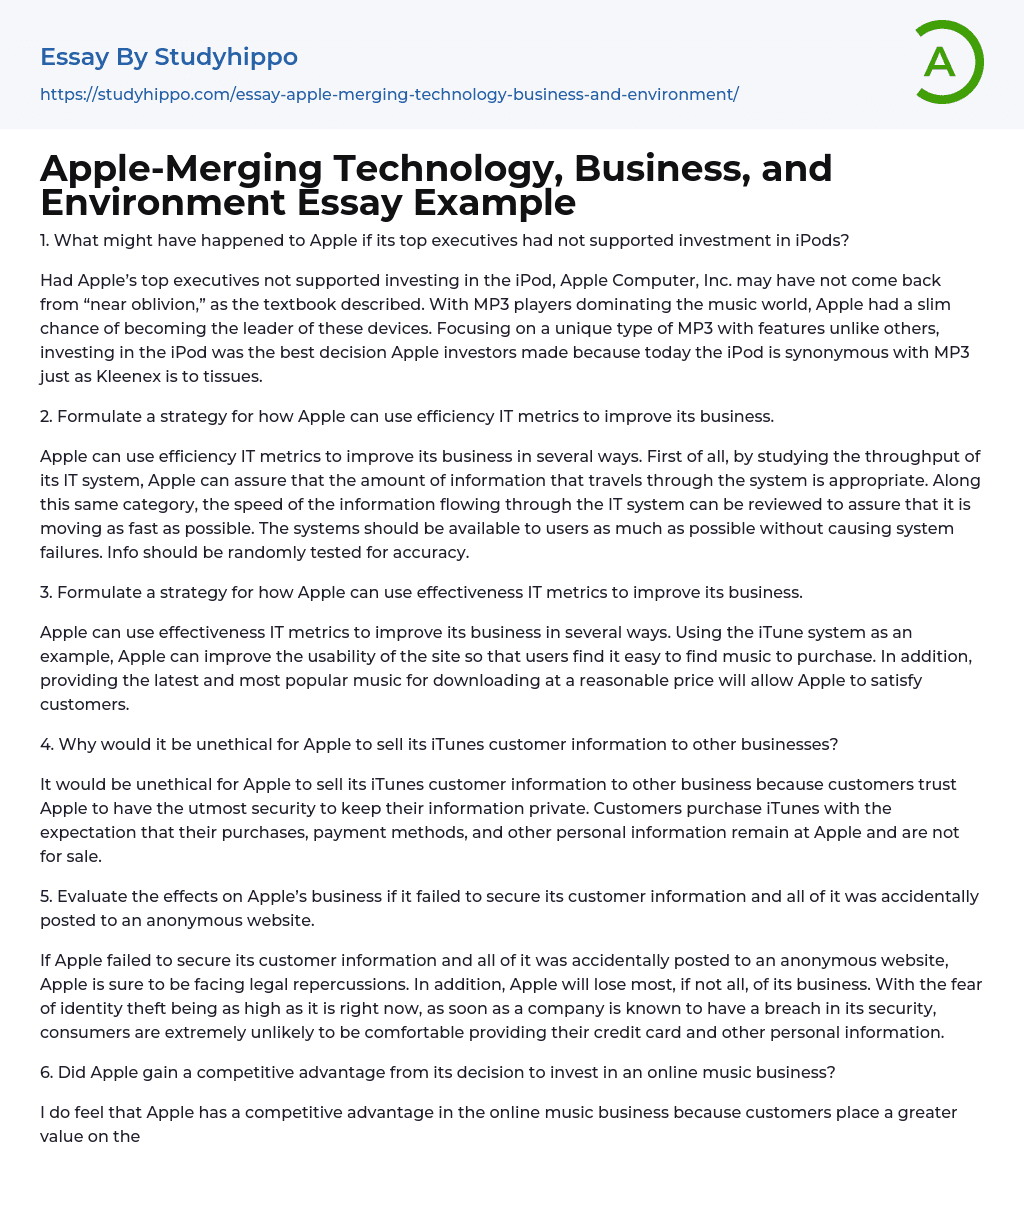 Apple-Merging Technology, Business, and Environment Essay Example